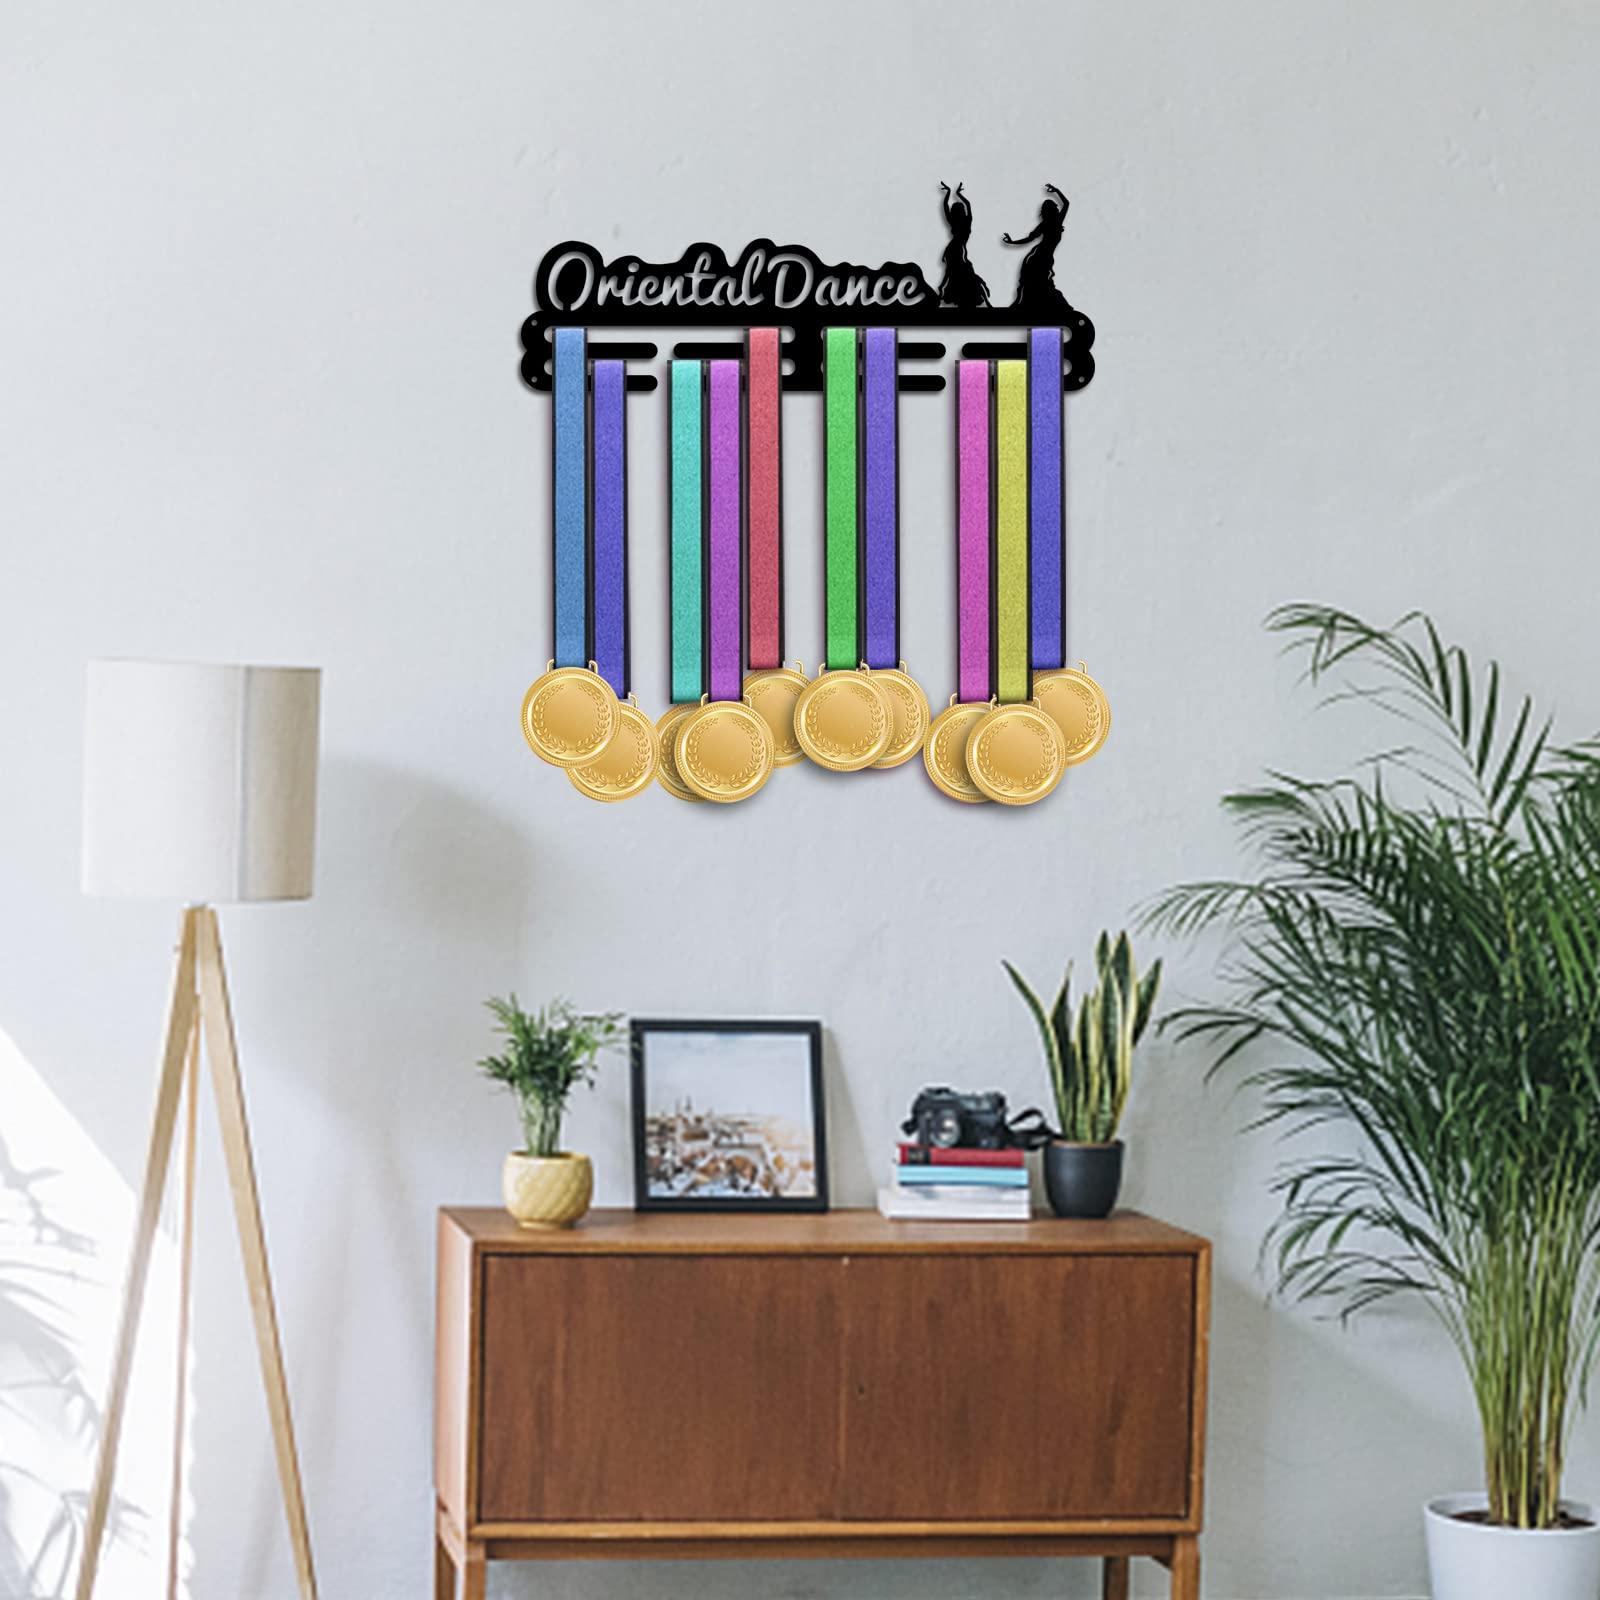 PH PandaHall Oriental Medal Hanger Display, Dance Medal Hooks Sports Medal Holder 3 Lines Sport Award Rack Wall Mount Iron Frame for over 50 Medals Necklace Jewellery 40x15cm/15.7x5.9inch 4